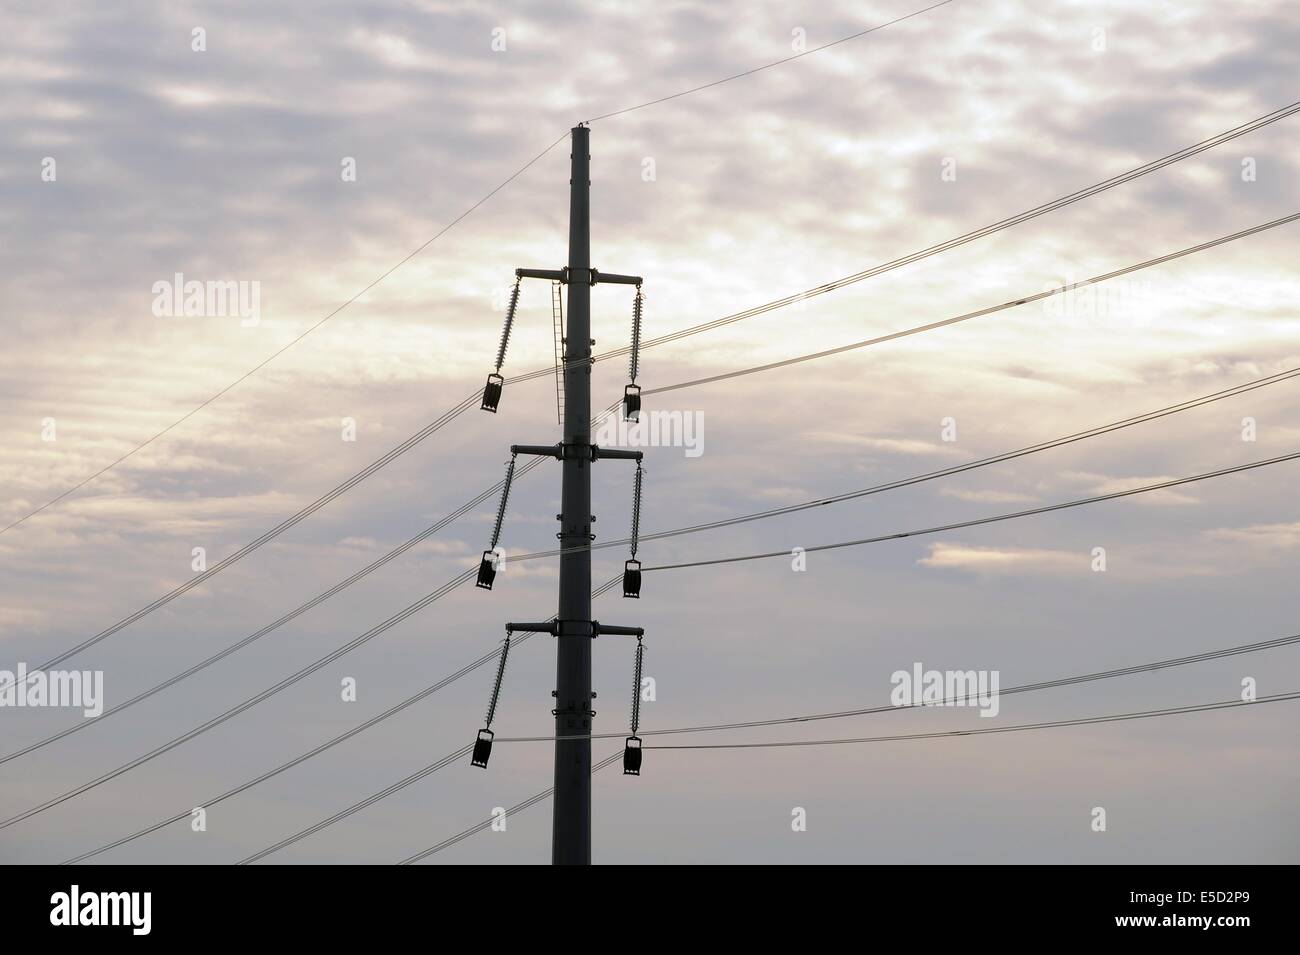 Italy, reconstruction of an high-voltage power line with low environmental and scenic impact pylons Stock Photo